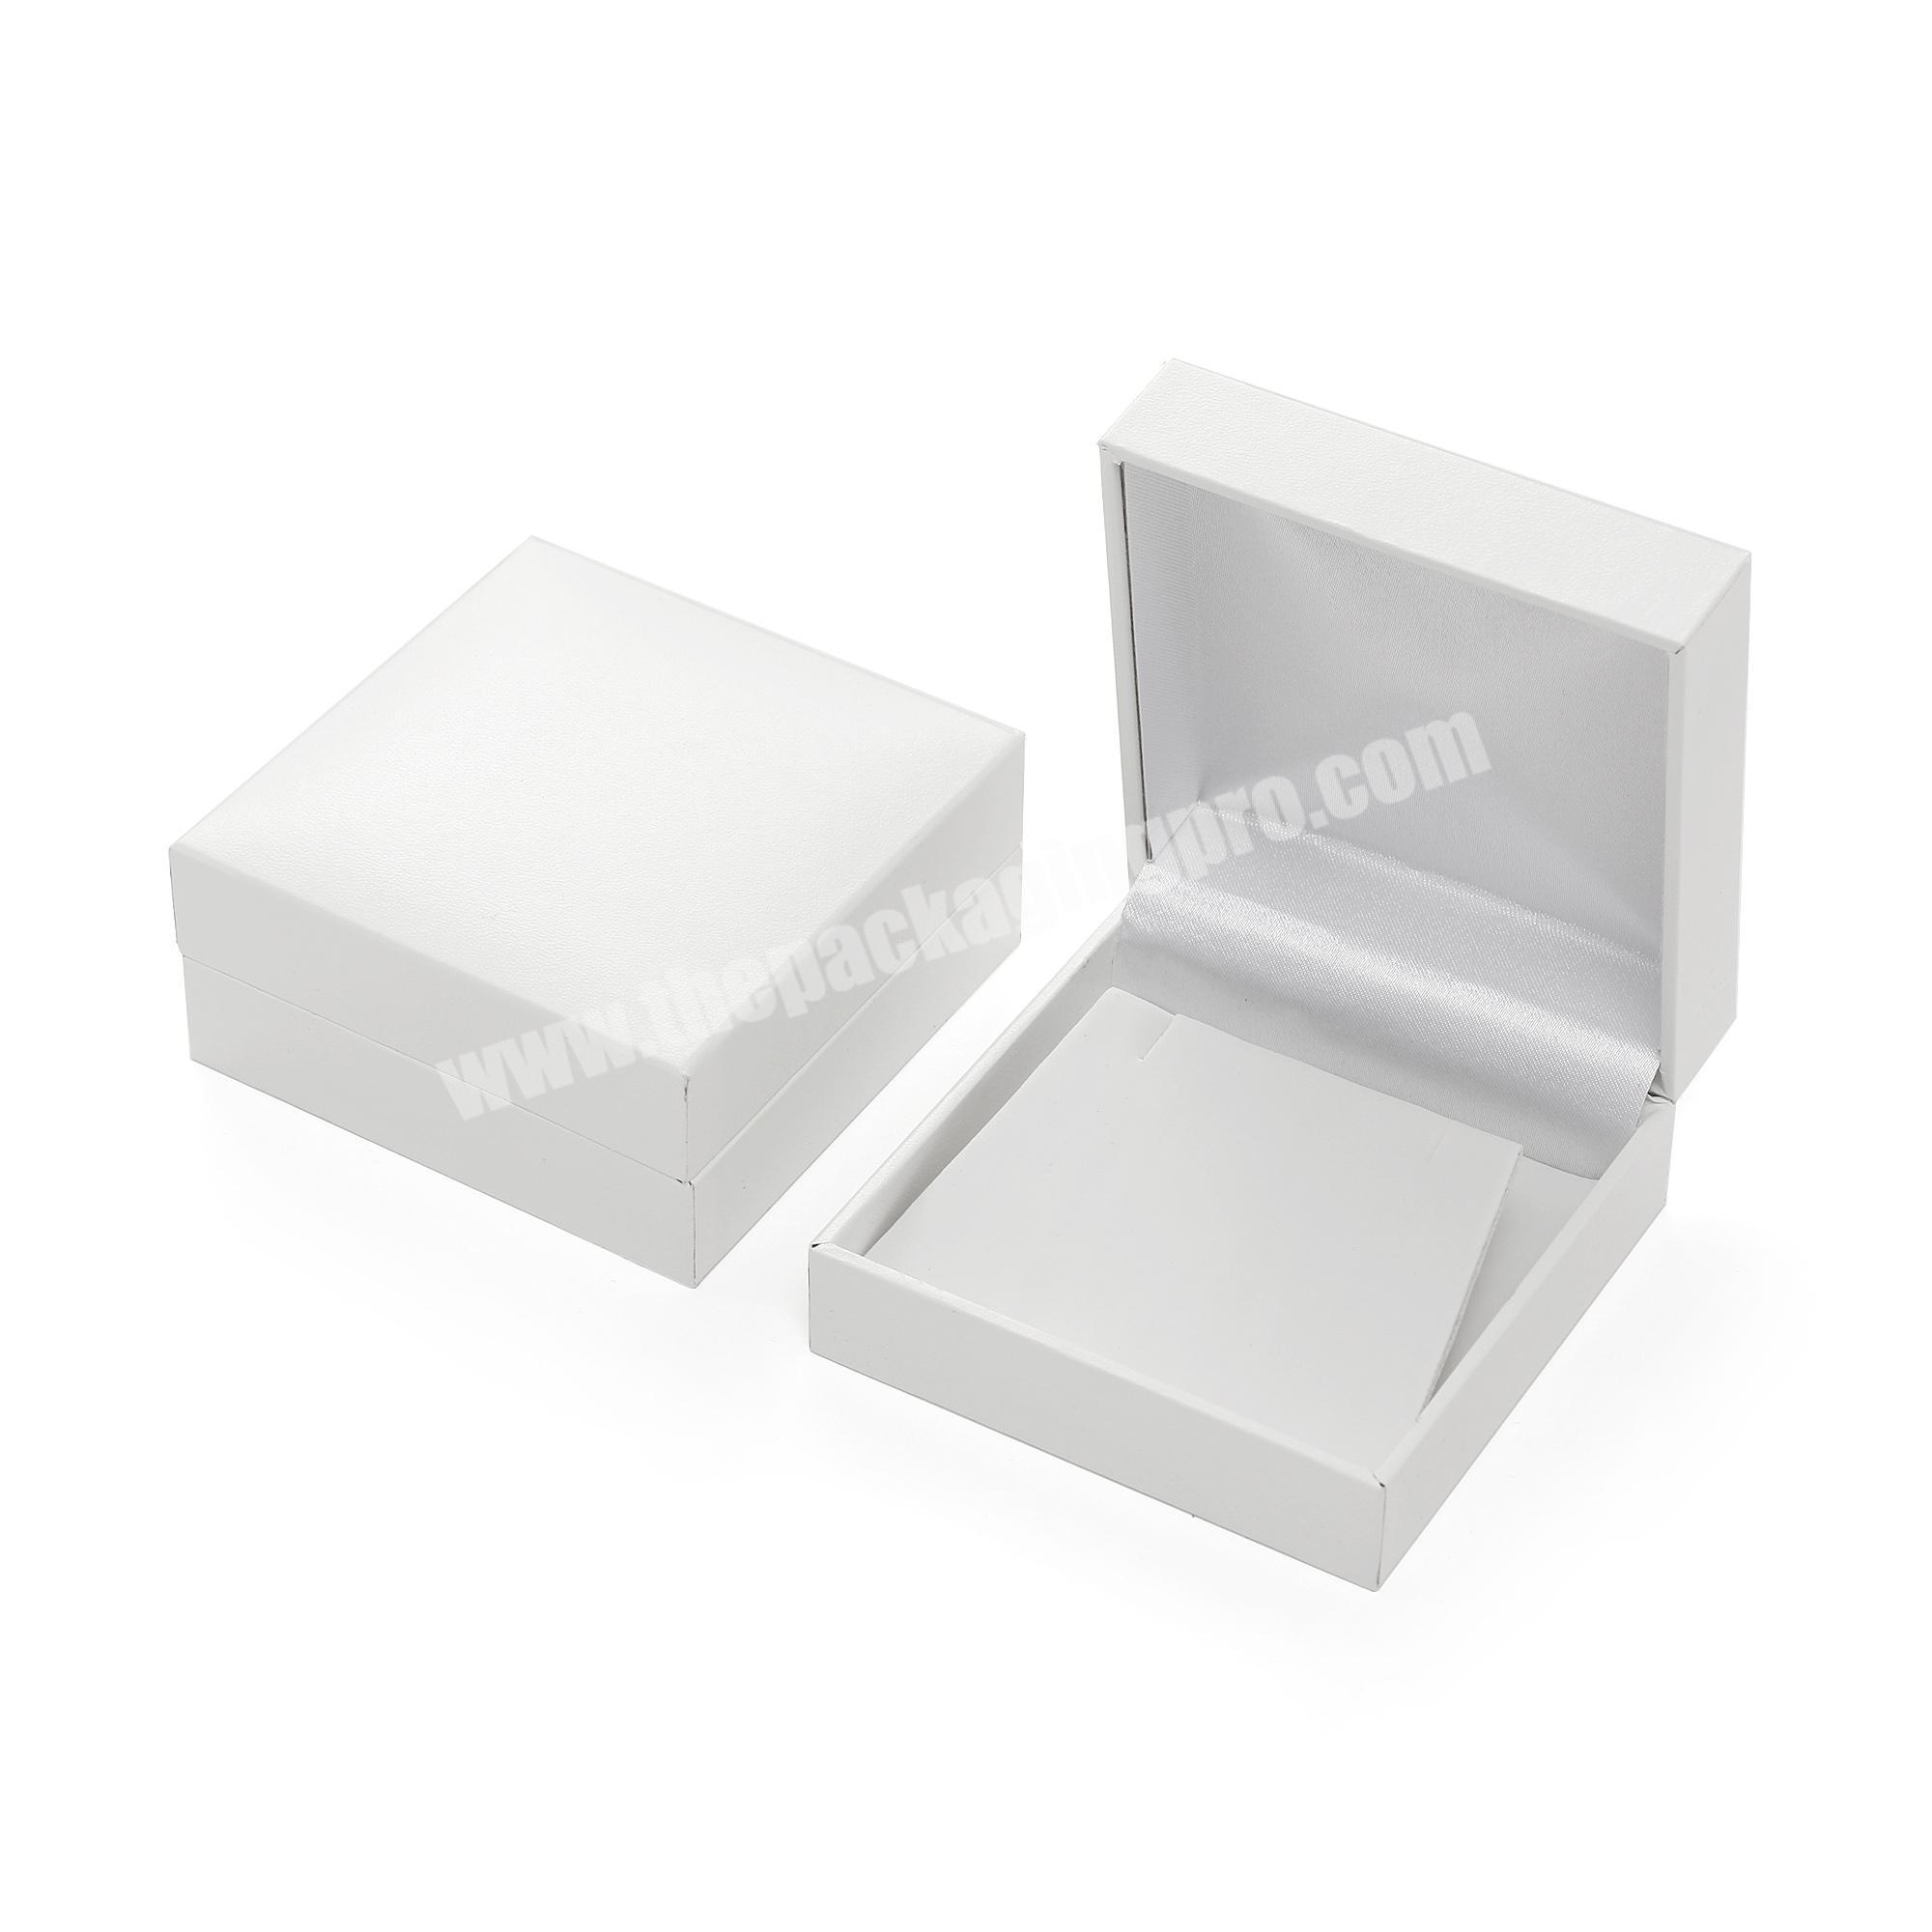 White Leather Jewelry Box Packaging,Jewelry Gift Box For Earrings